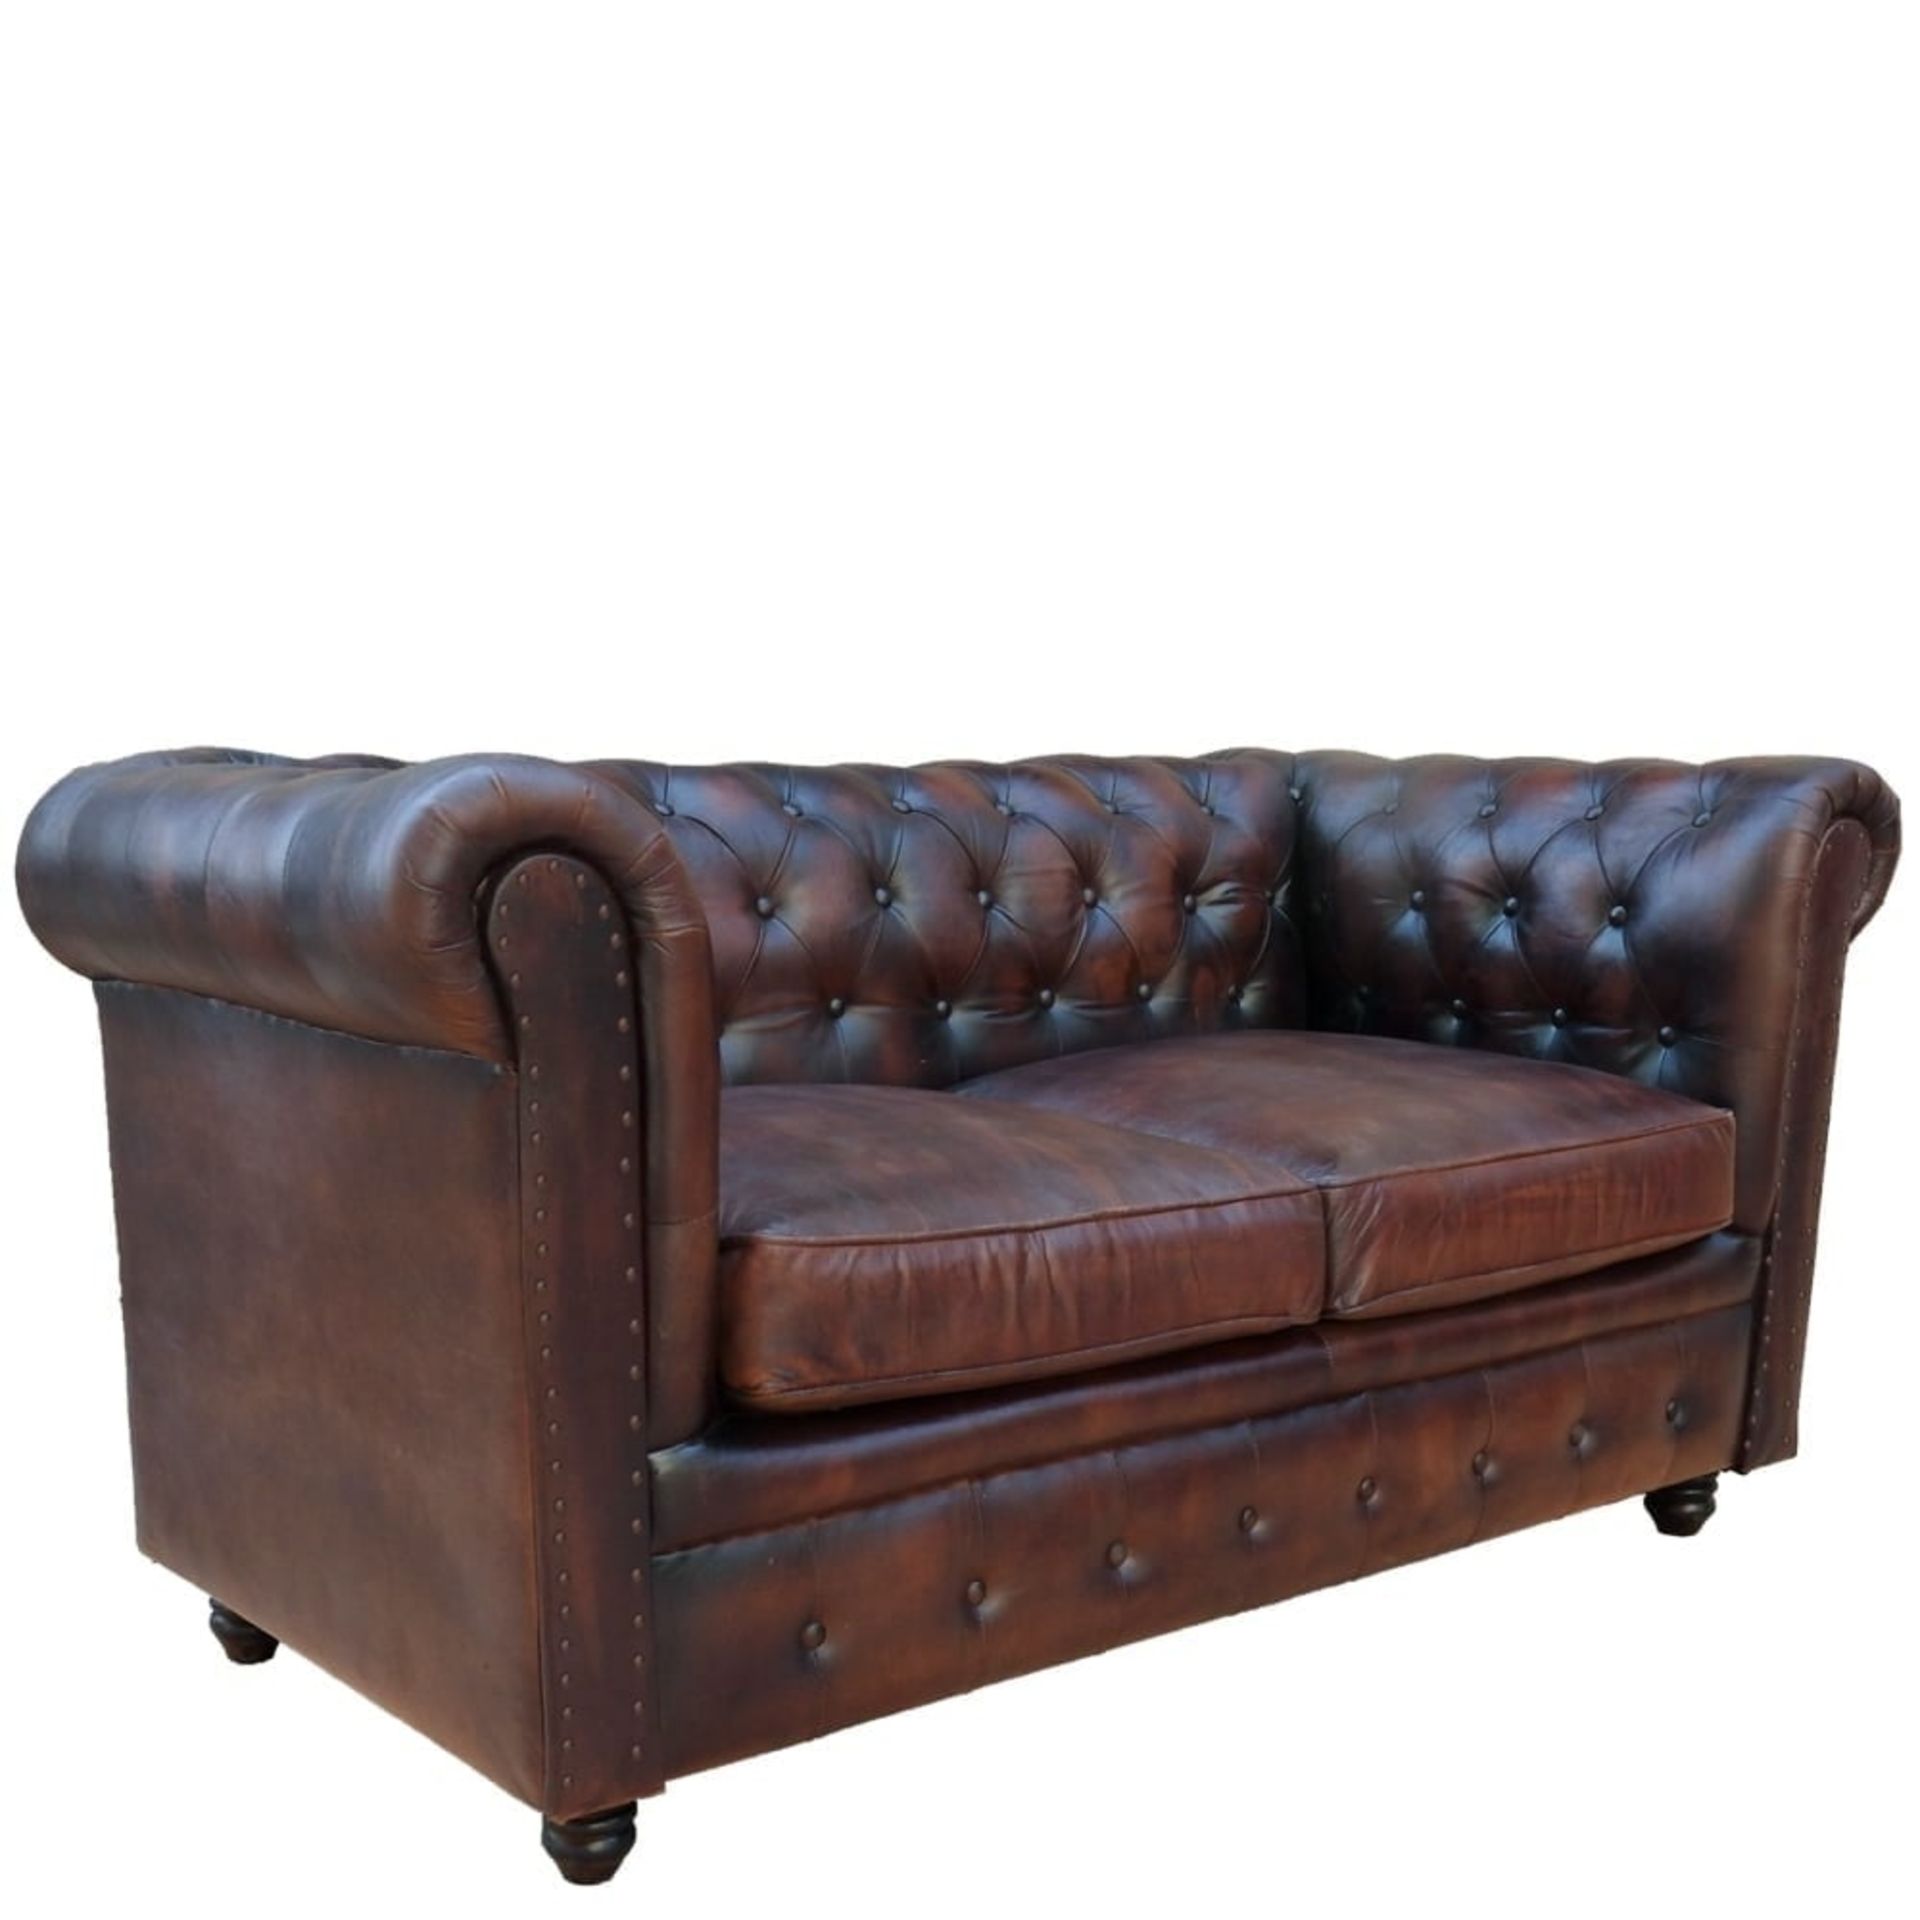 Shoreditch Leather Chesterfield 2-Seater Sofa Handmade - Image 3 of 5